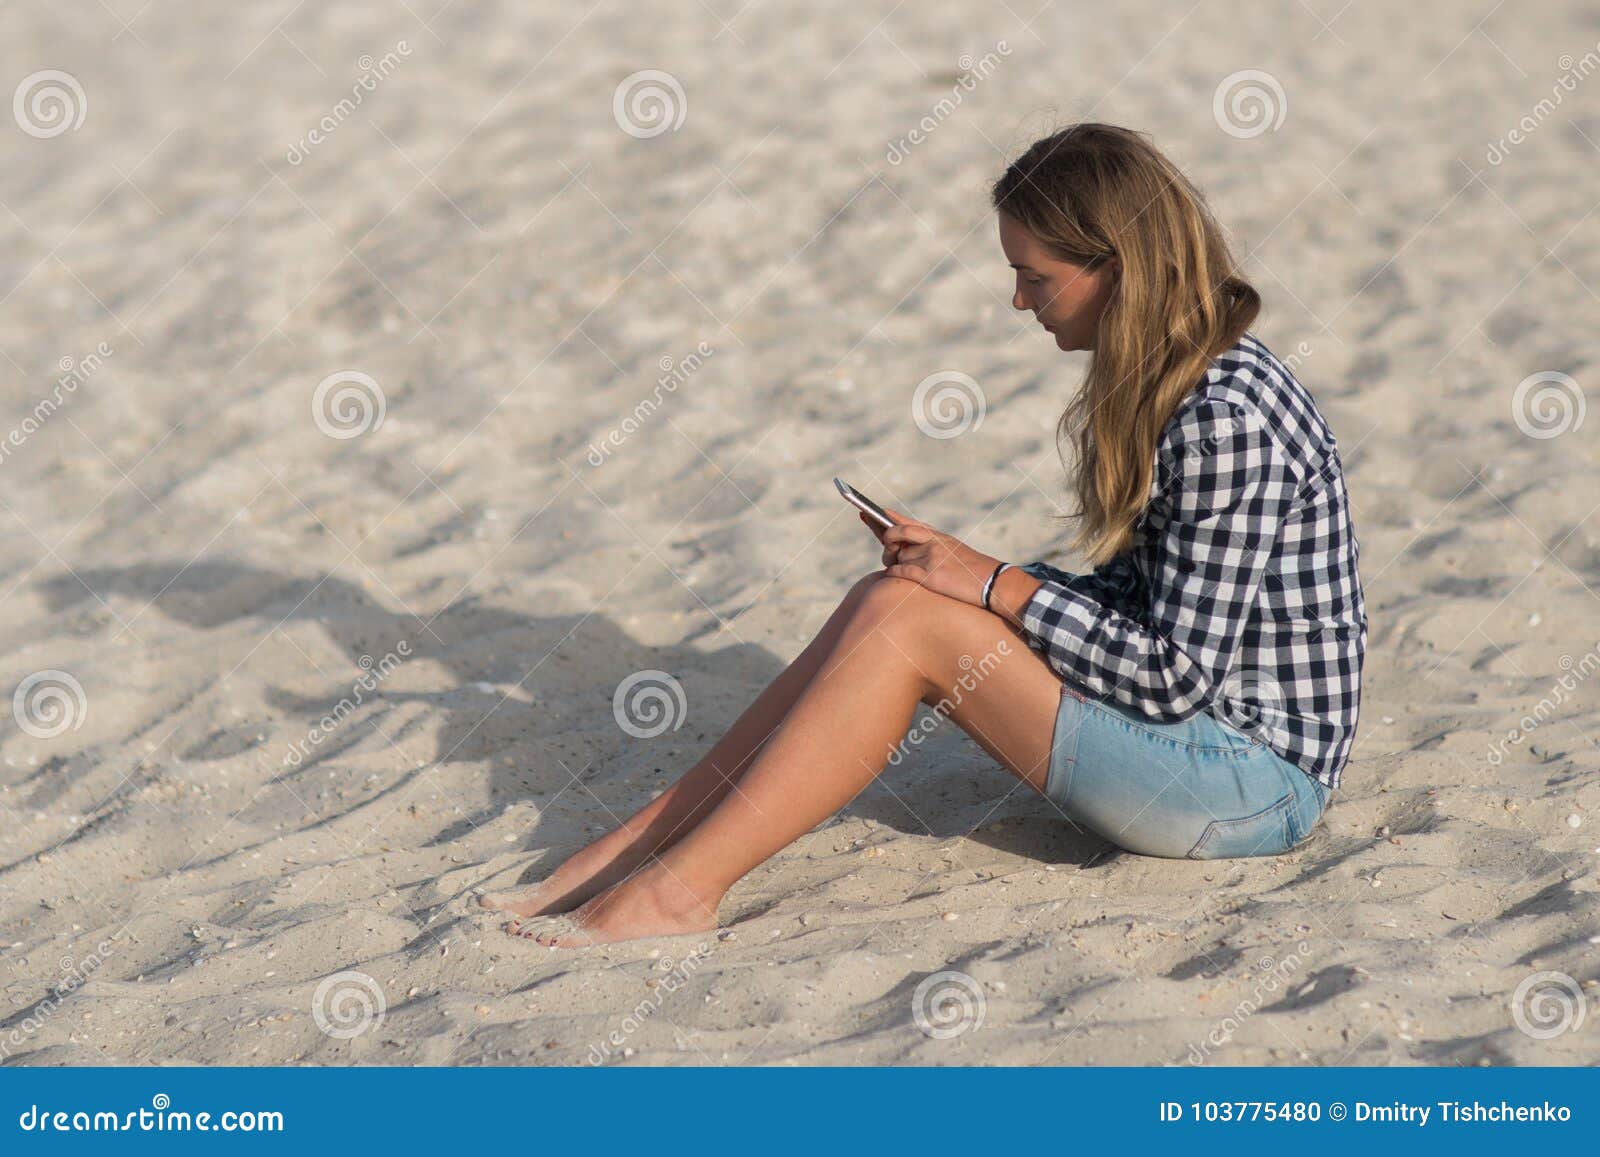 Beautiful Girl Holding A Smartphone In The Hands On The Beach Near The